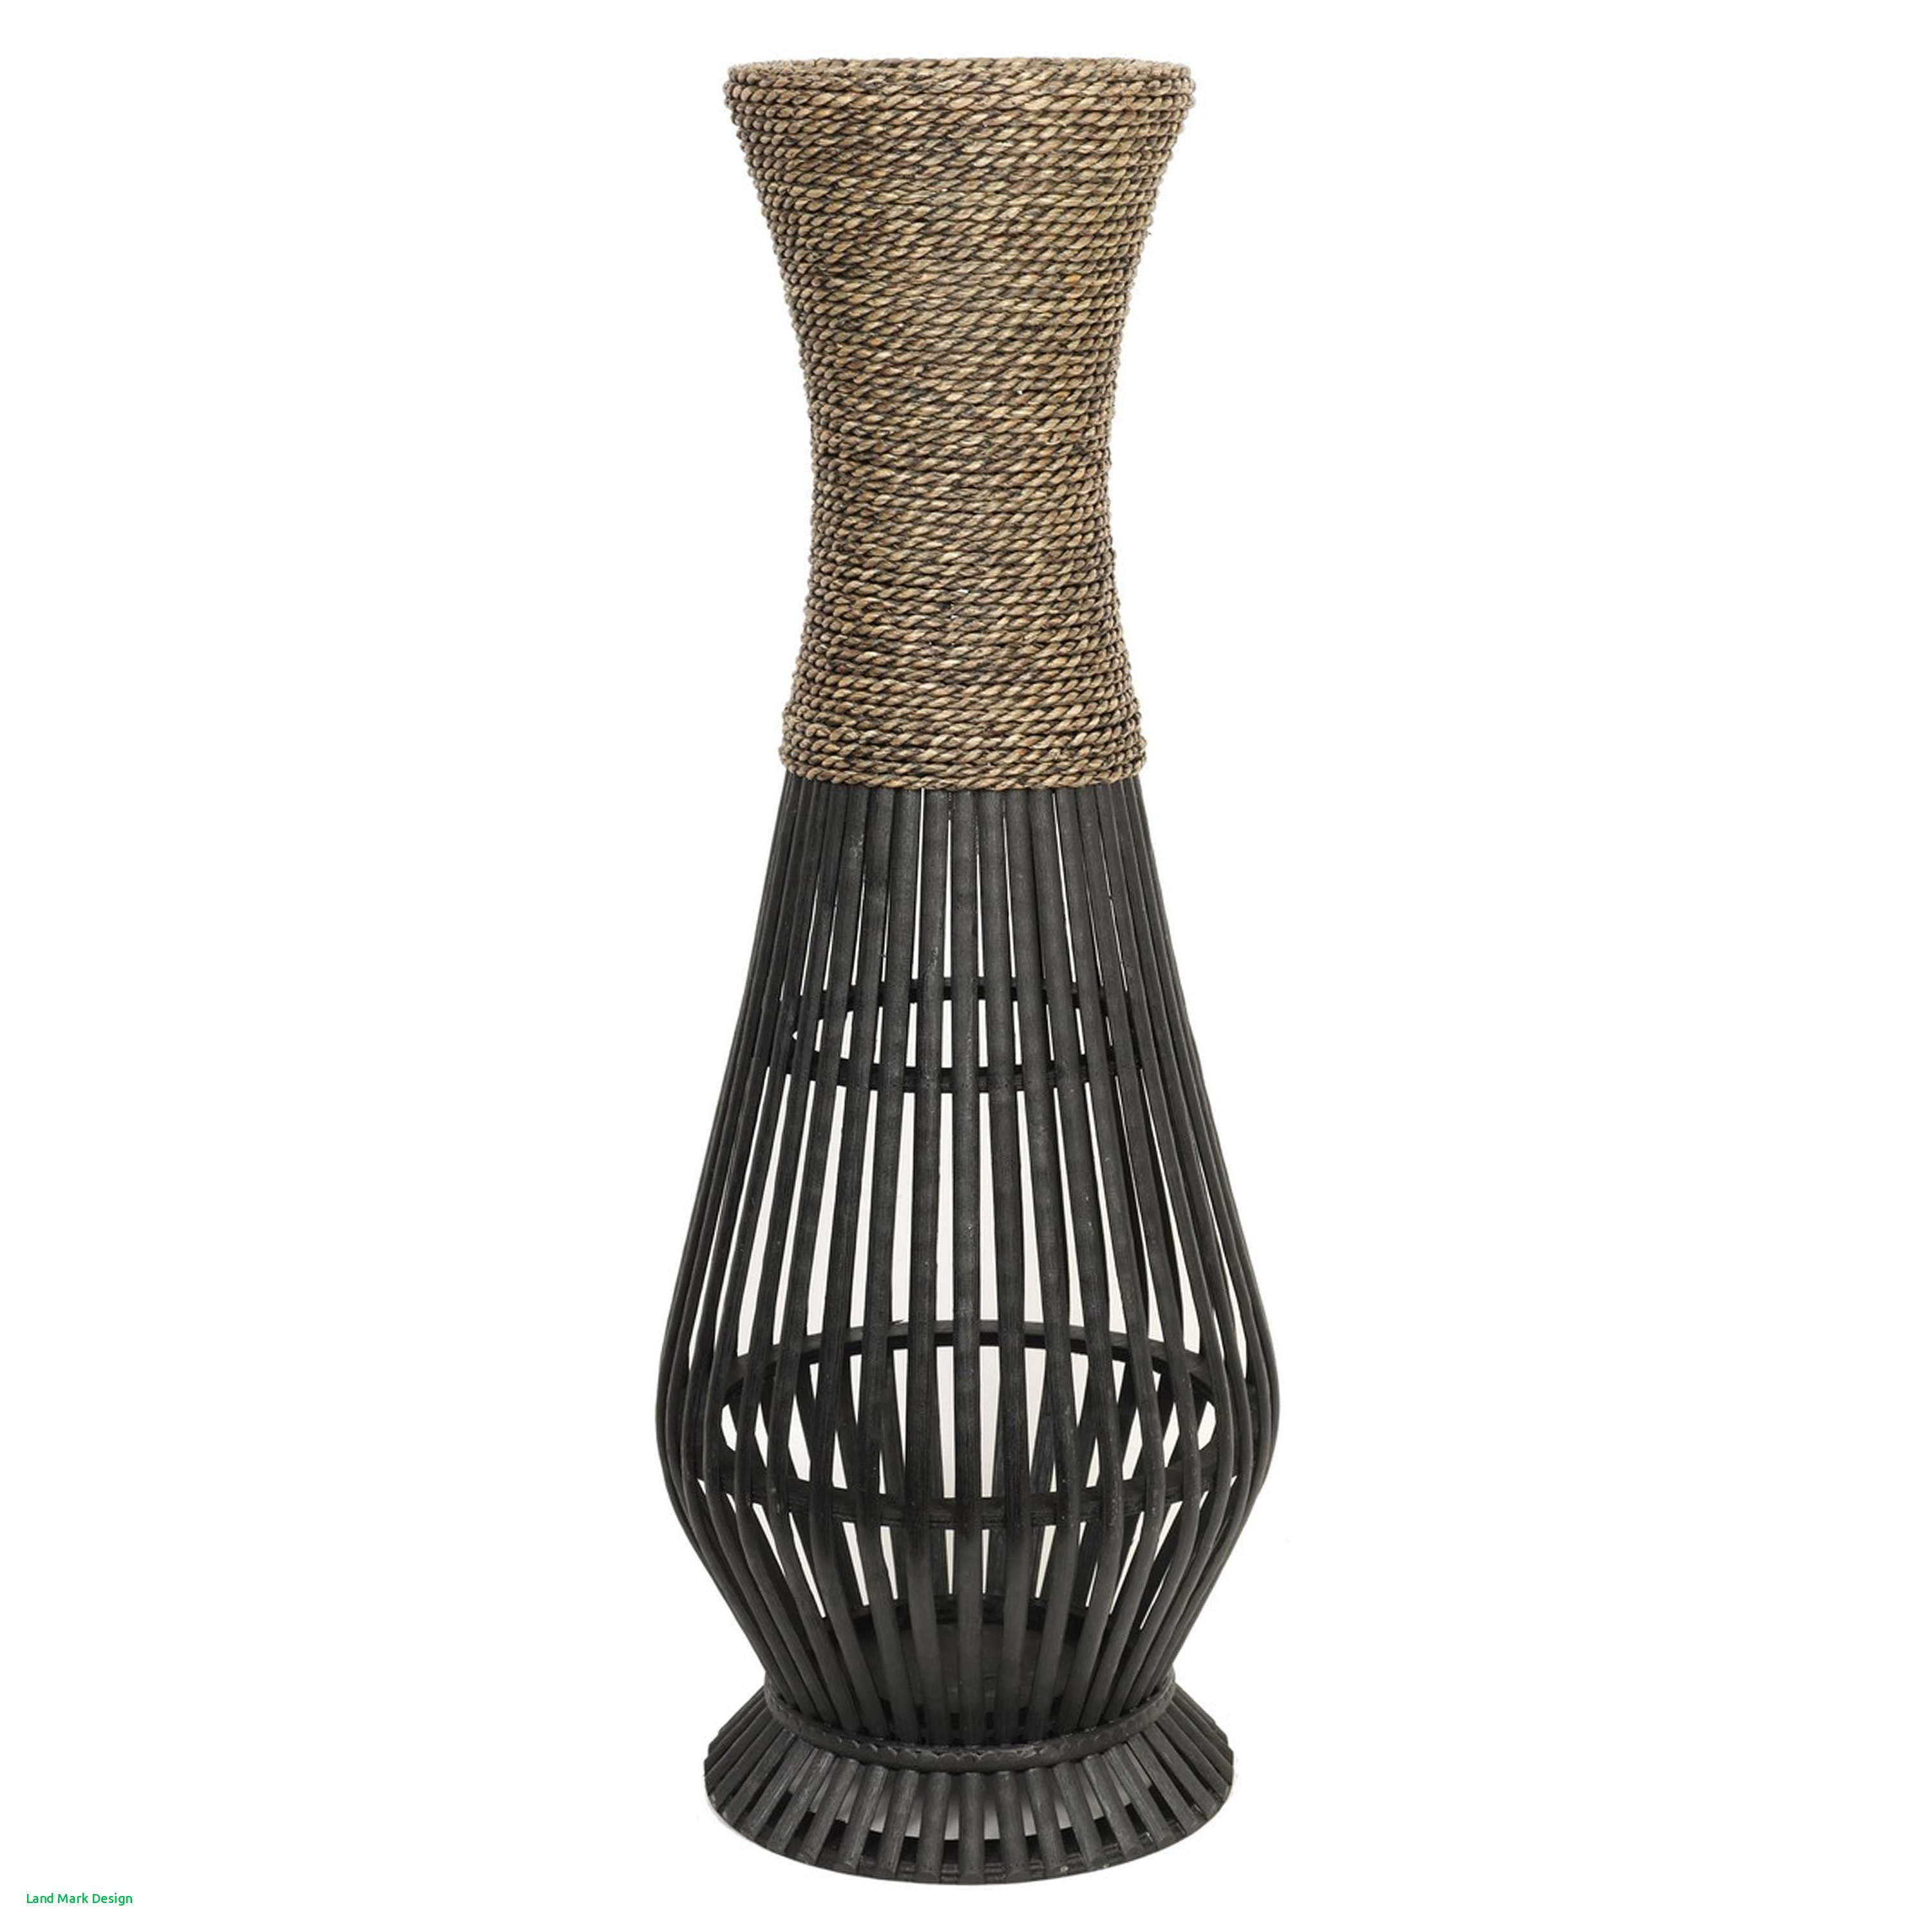 24 attractive Wood Turned Vase 2024 free download wood turned vase of images of tall wooden vase vases artificial plants collection pertaining to tall wooden vase stock tall wicker vase design of images of tall wooden vase